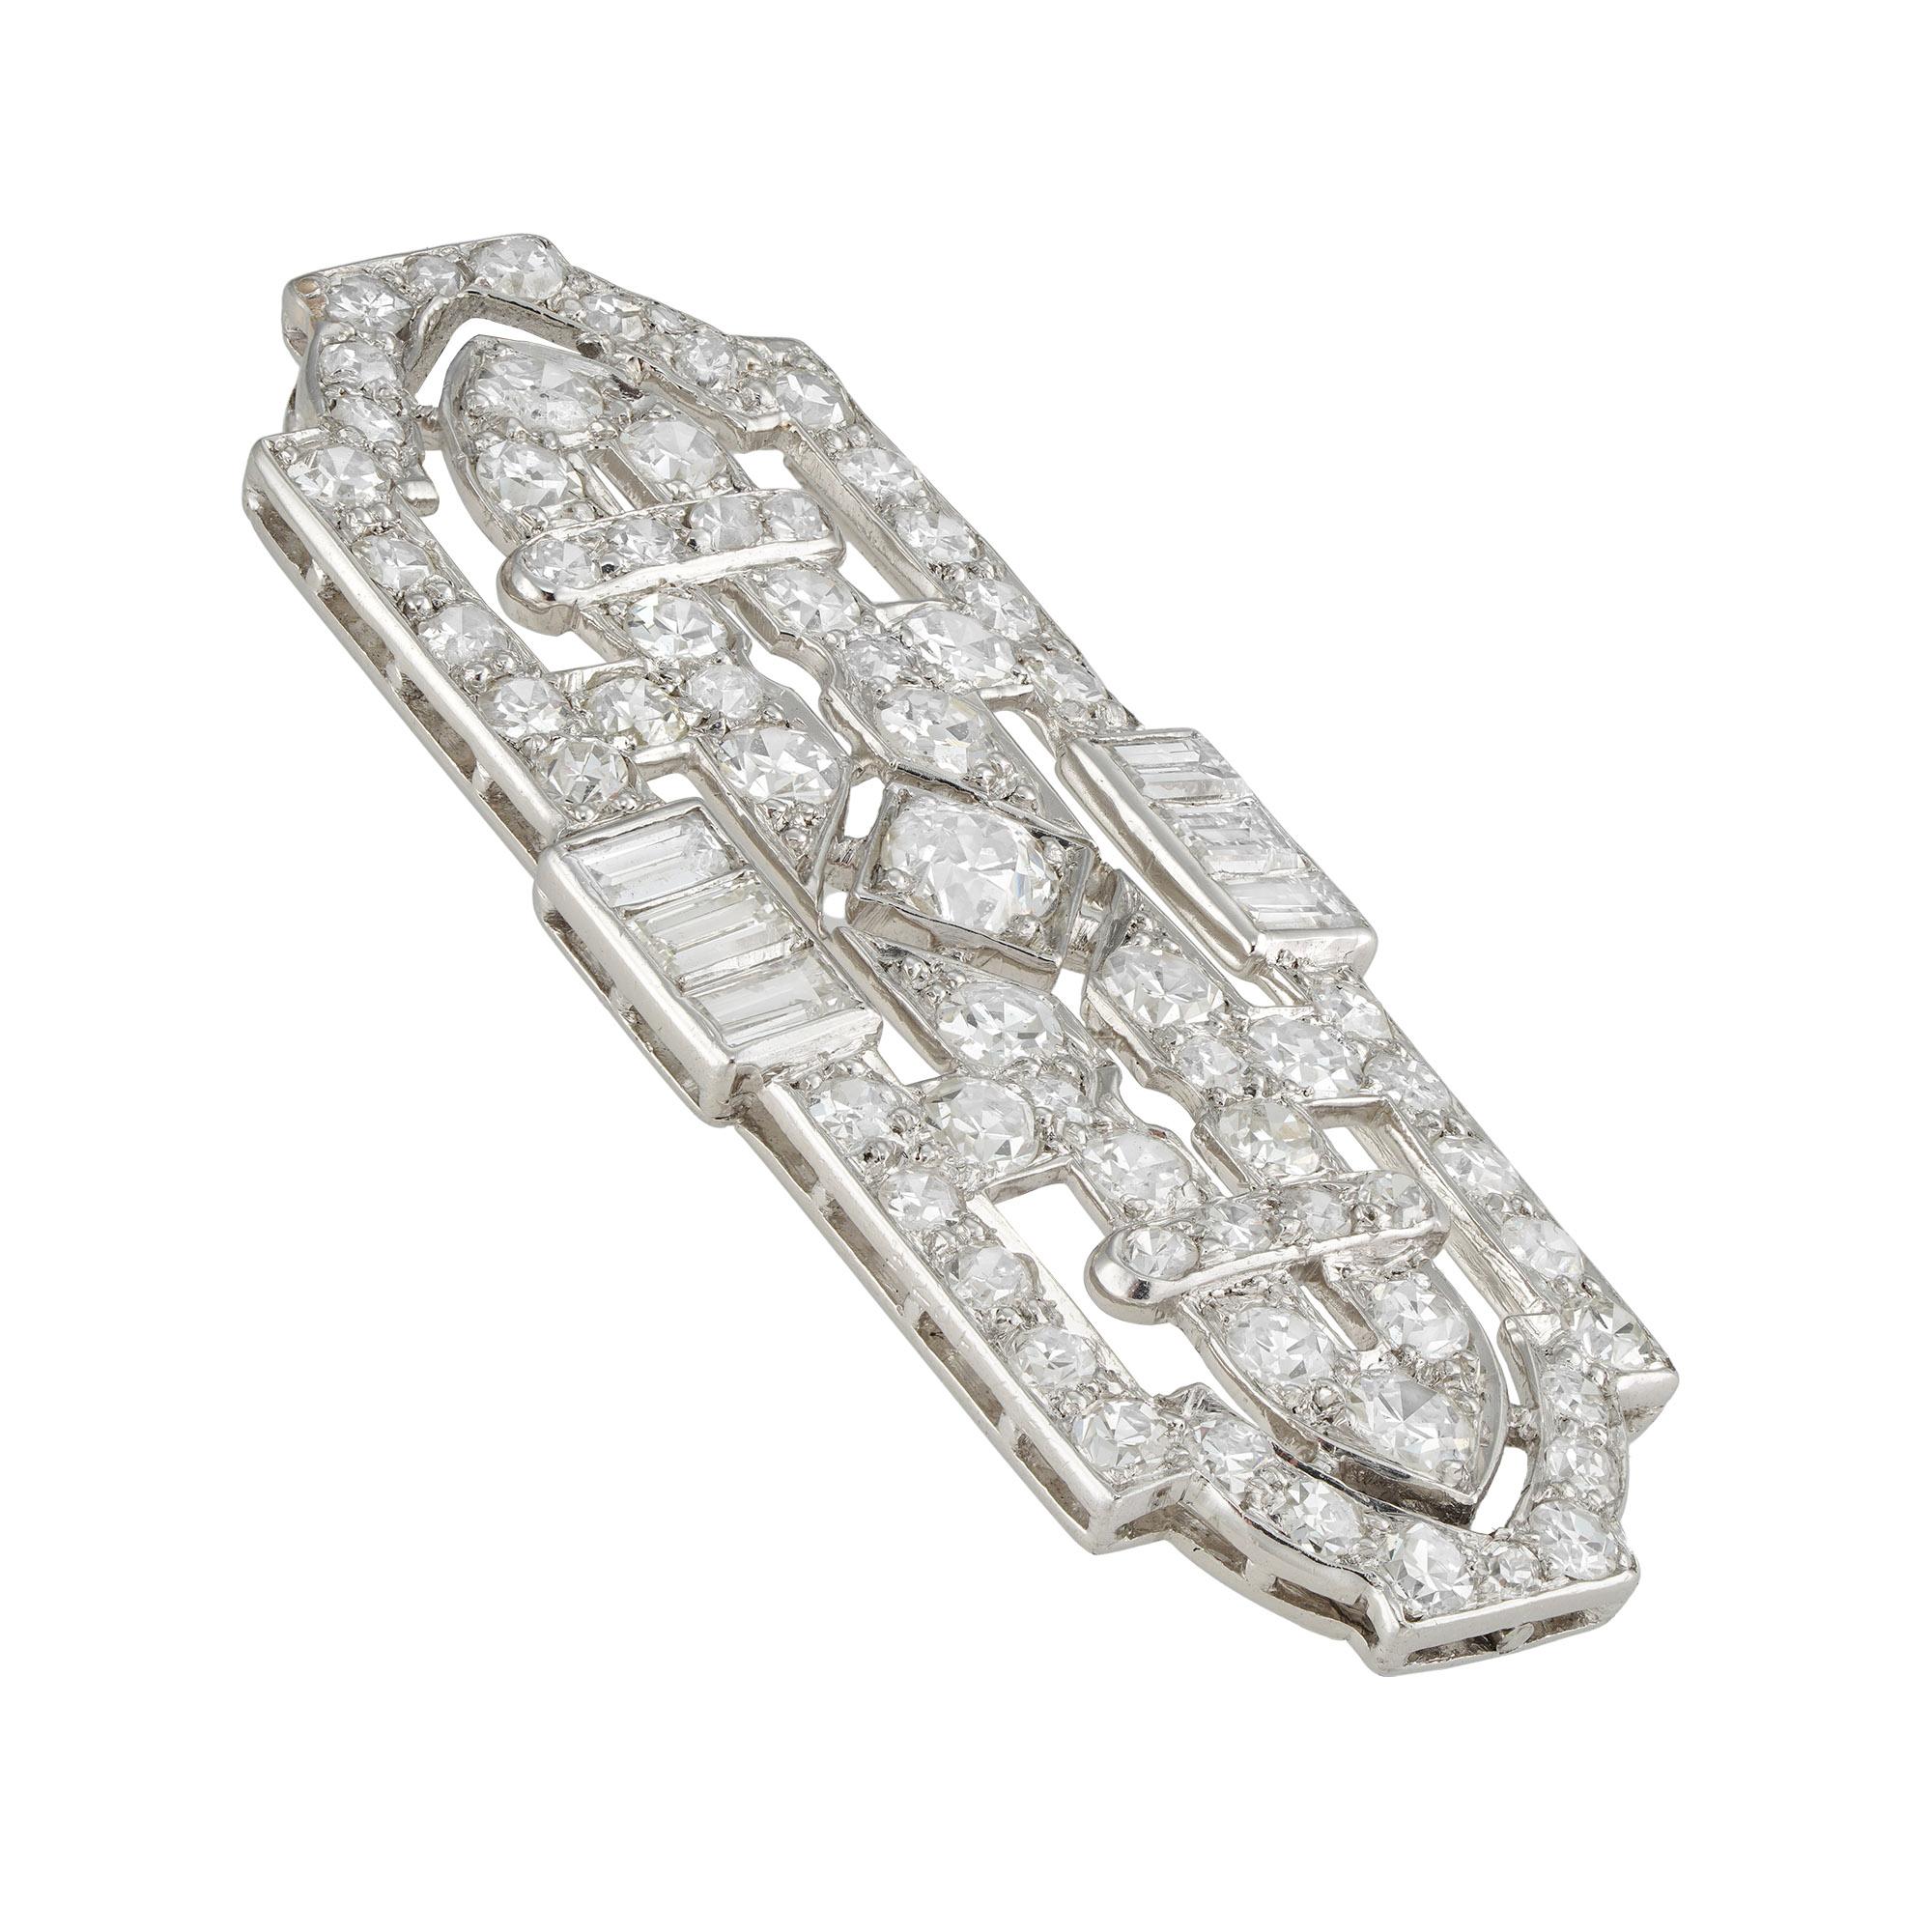 An Art Deco diamond plaque brooch, the openwork geometric designed plaque, set with old brilliant and baguette-cut diamonds estimated to weigh 2.4 carats in total, mounted in platinum with white gold brooch fitting, unsigned, bearing inventory